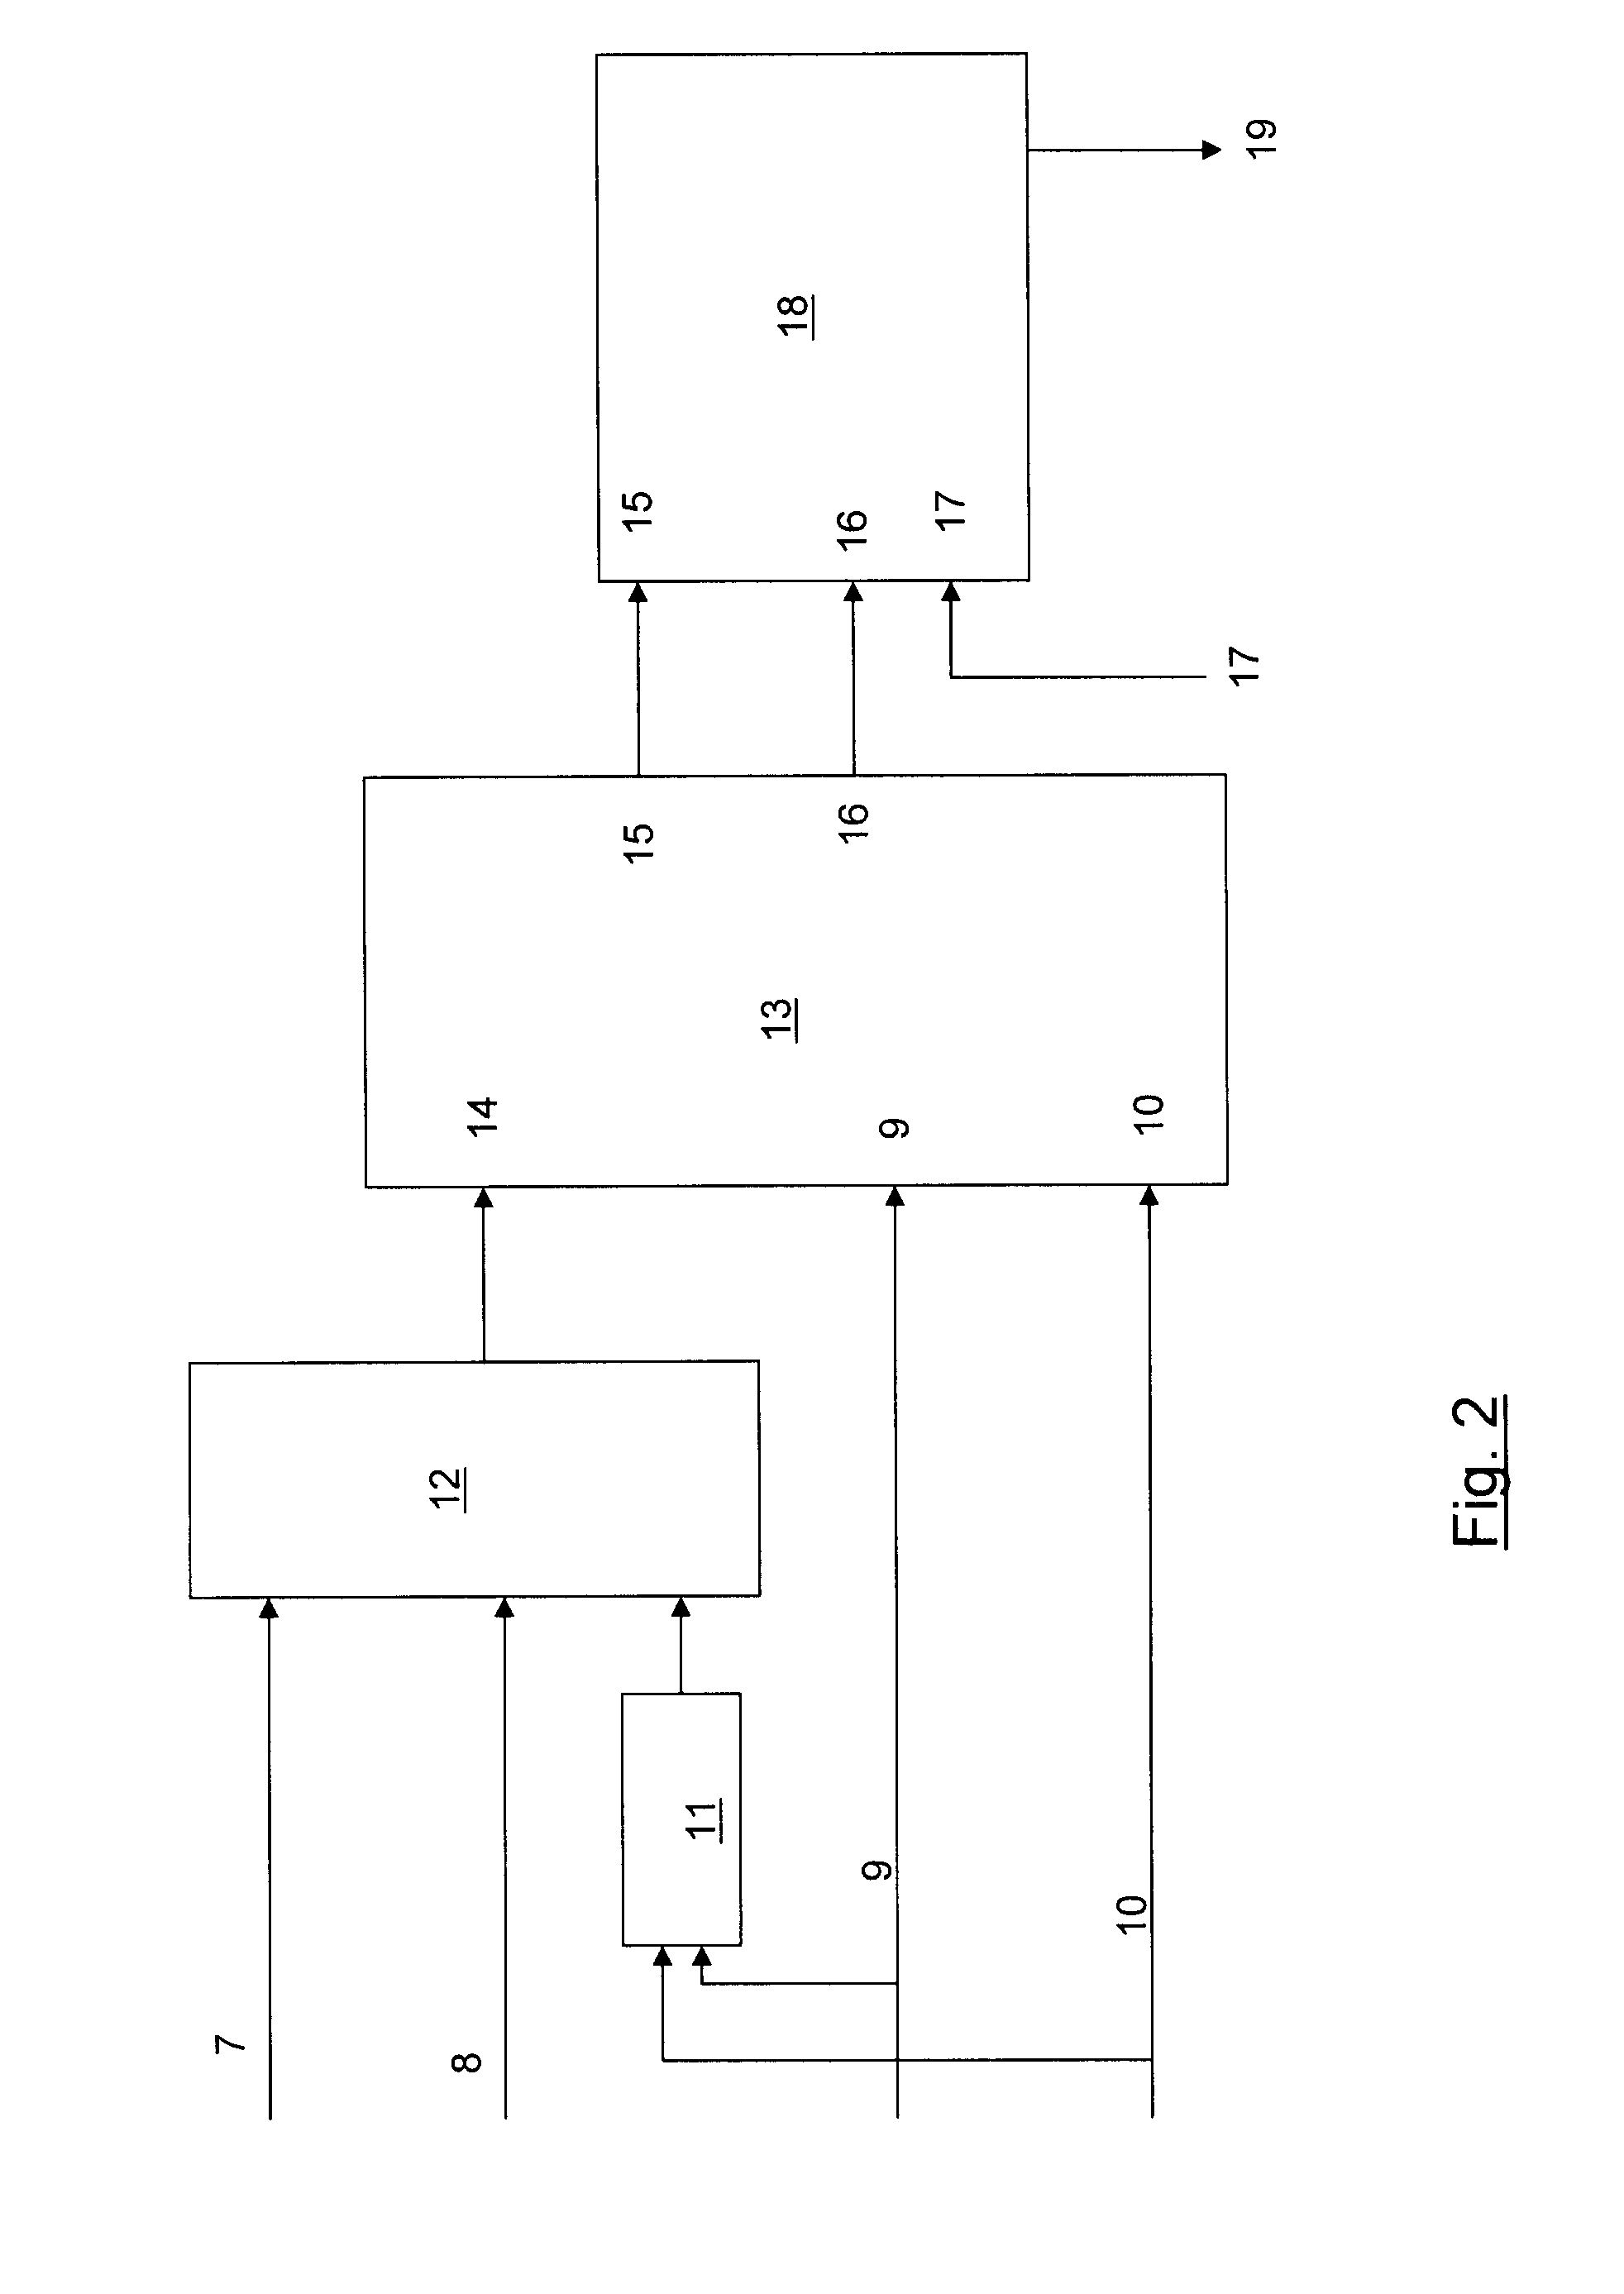 Method for Compensating for Drive Influences on the Steering System of a Vehicle Using an Electric Power Steering System